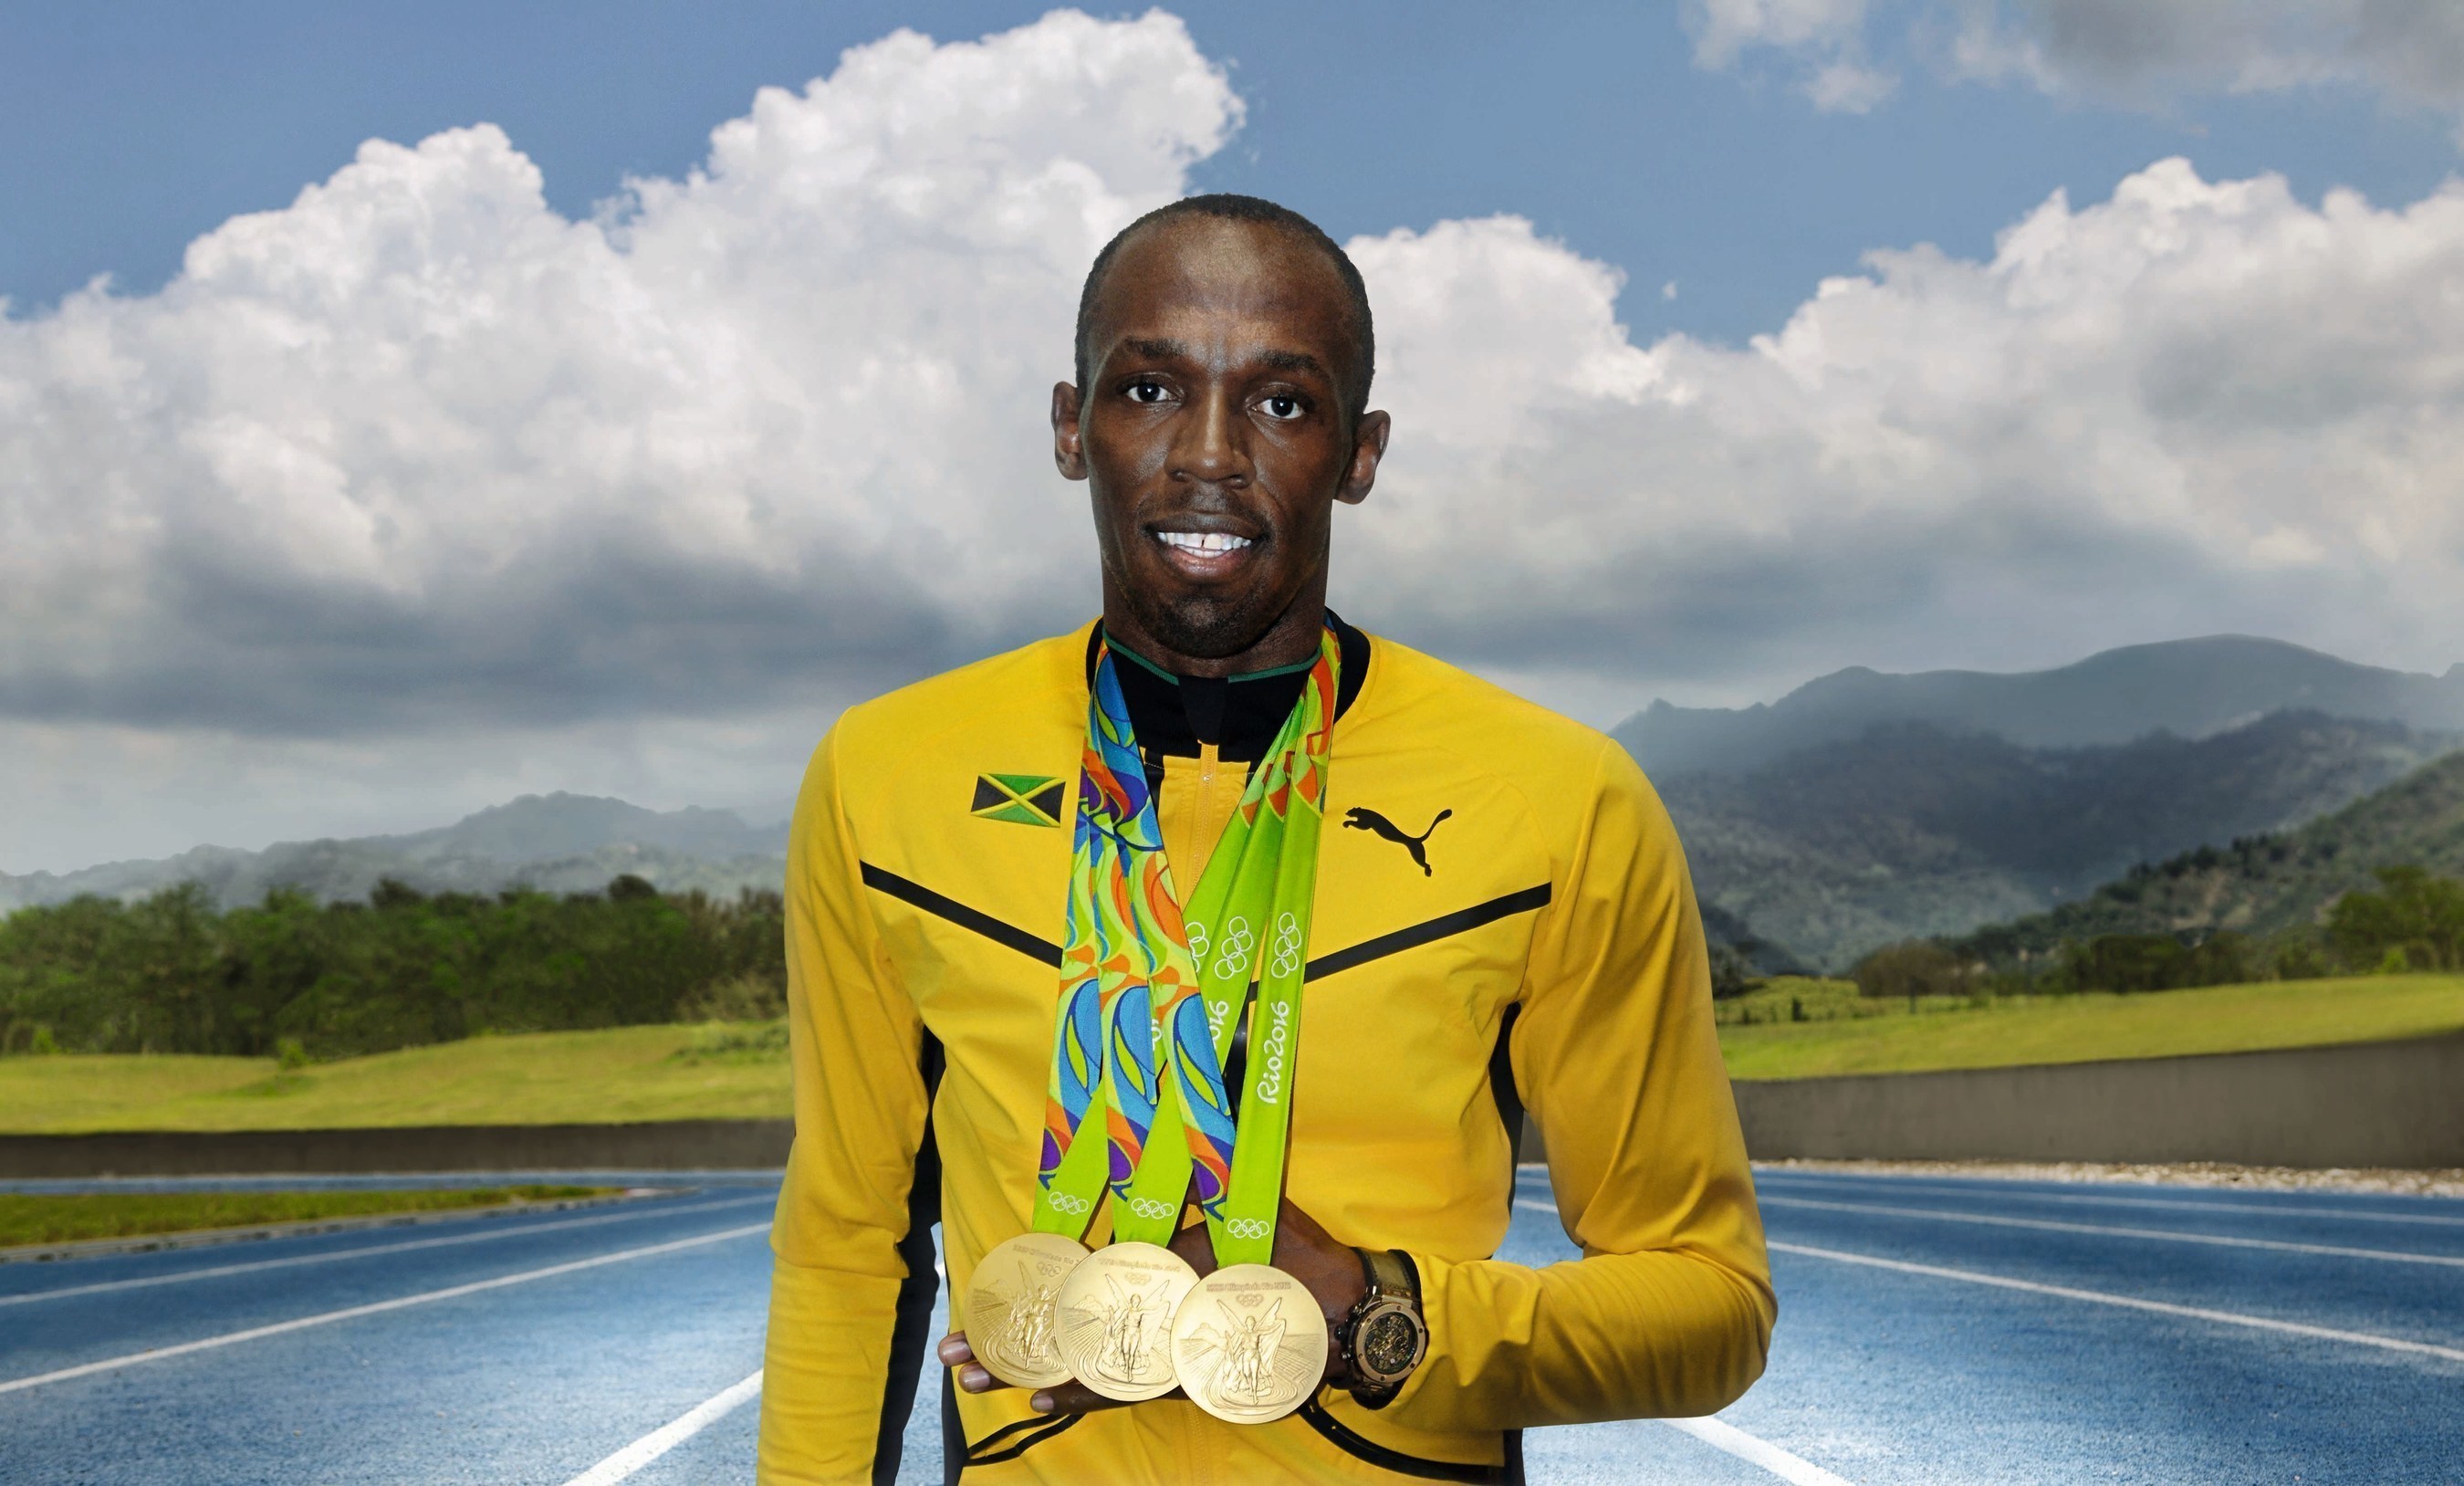 The Legend Usain Bolt with his 3 Gold Olympic Medals. (PRNewsFoto/HUBLOT)